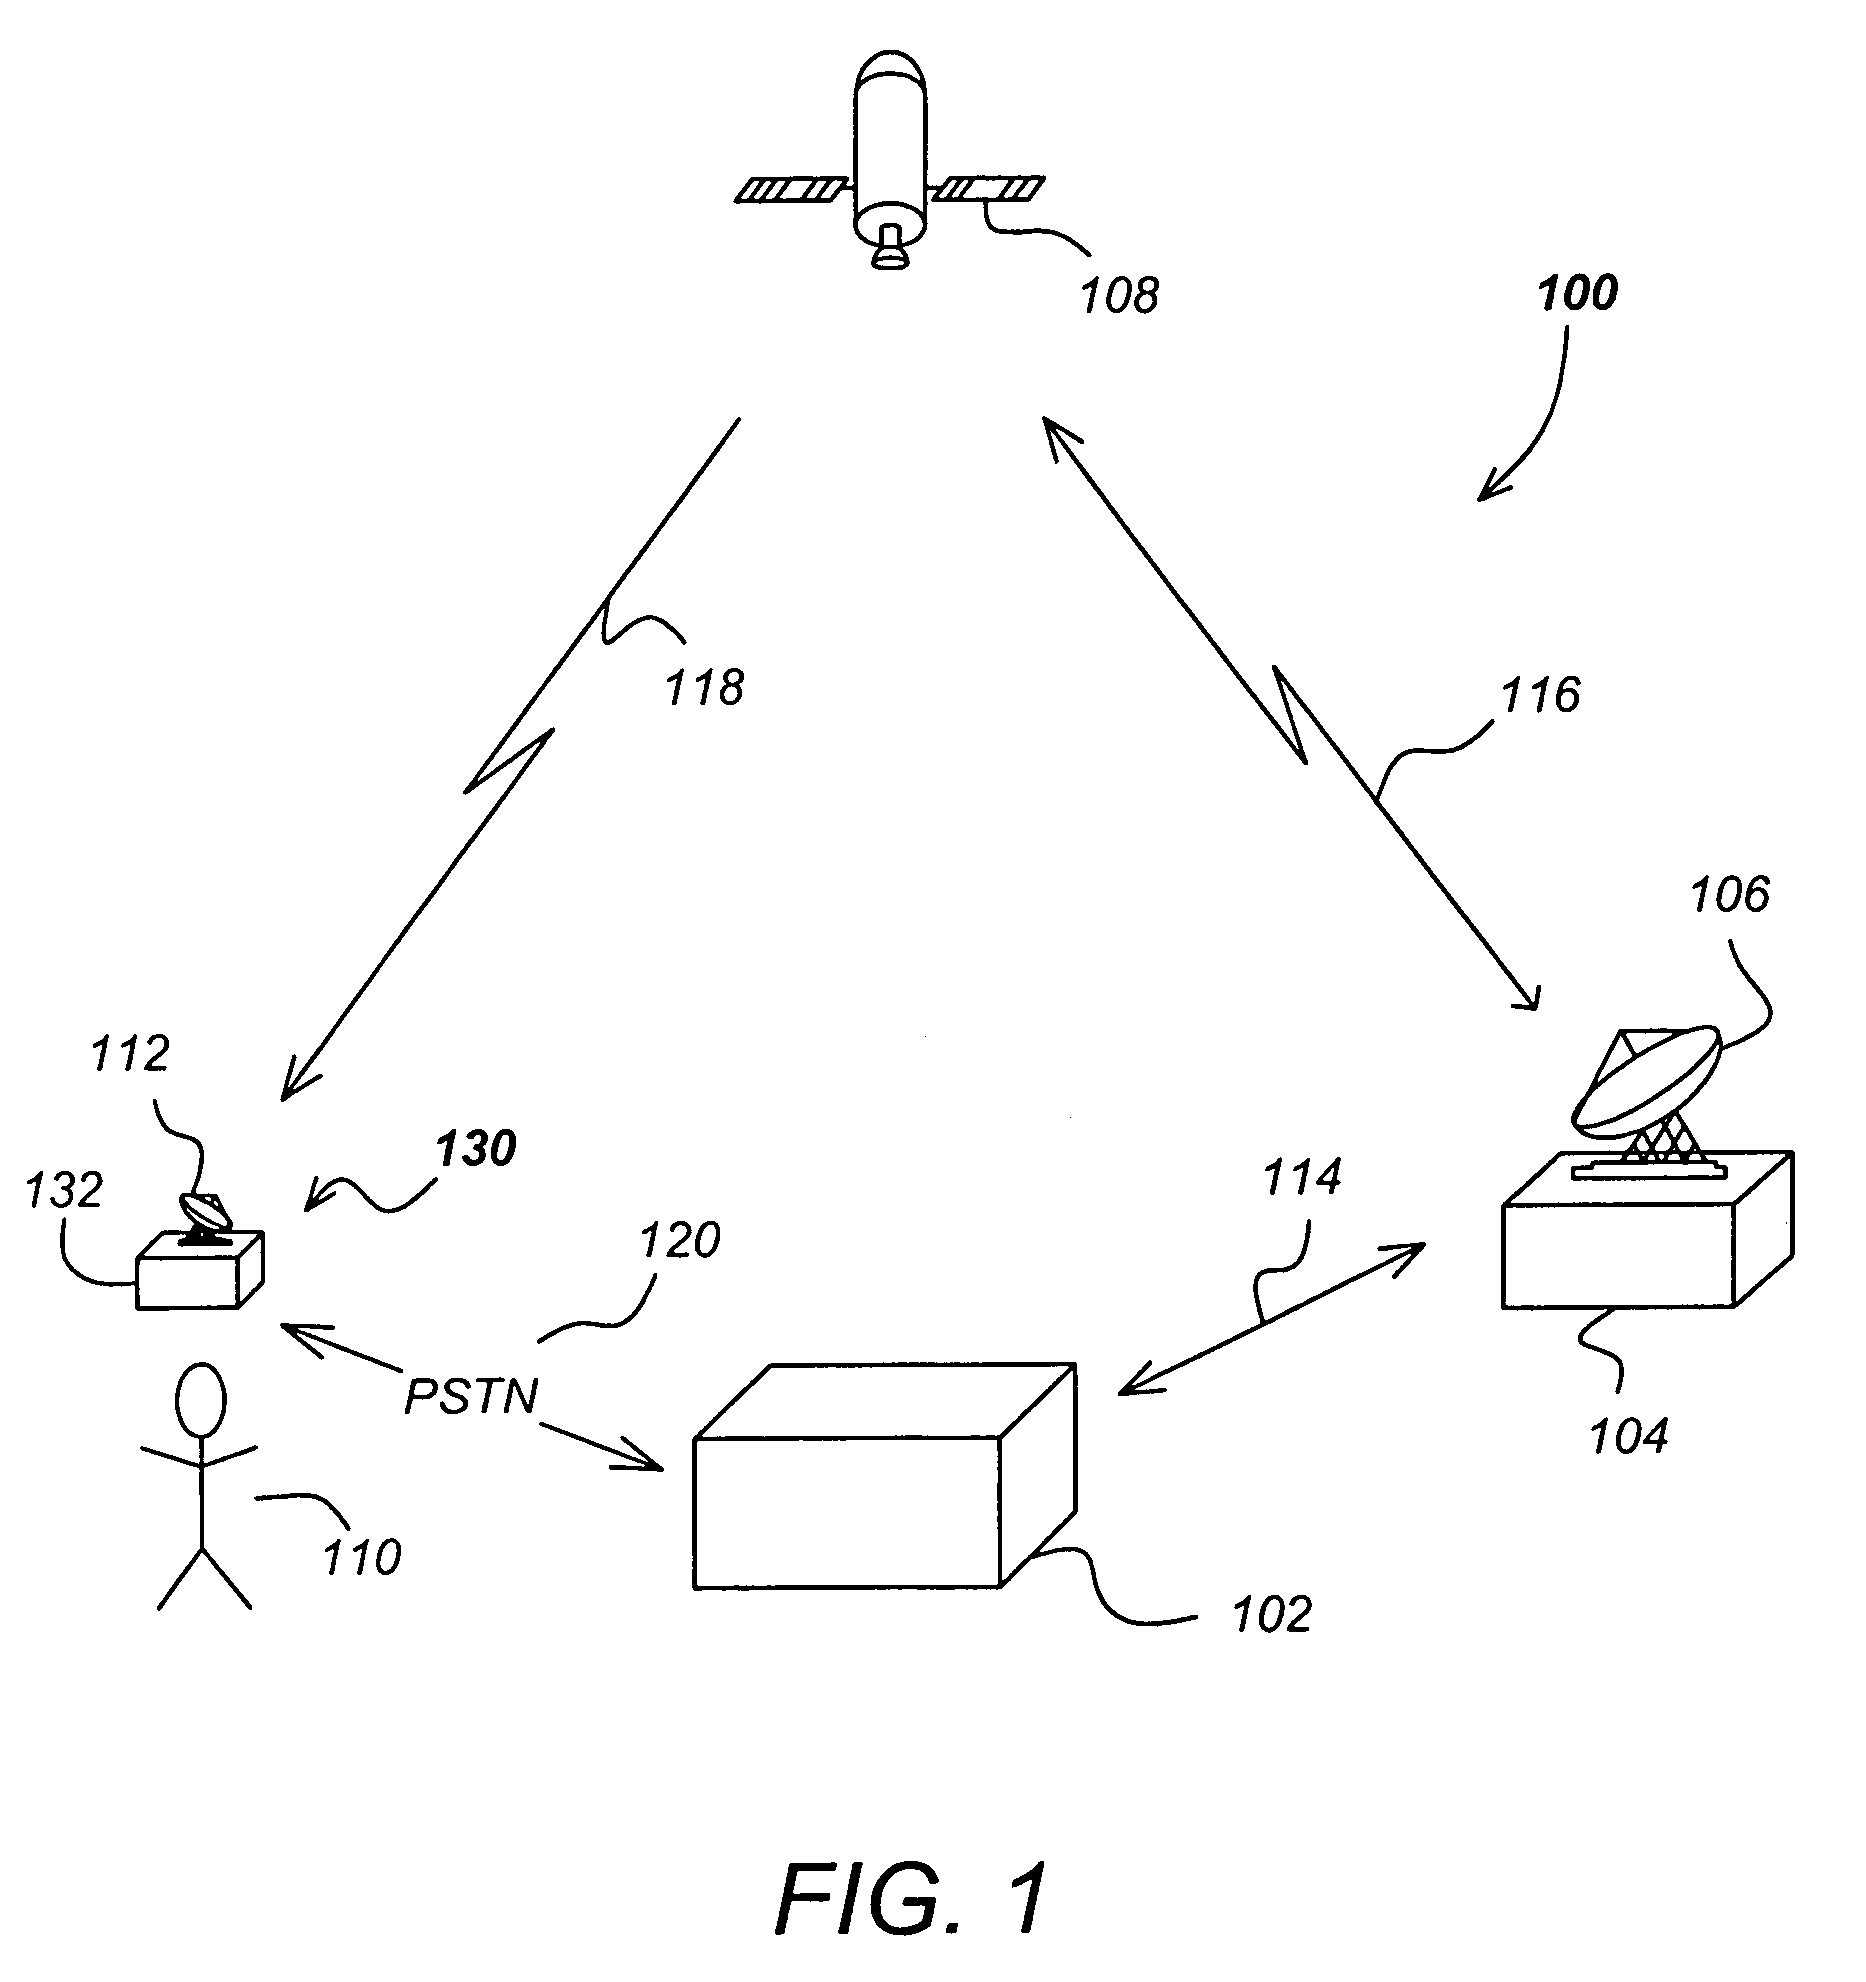 System and method for continuous broadcast service from non-geostationary orbits